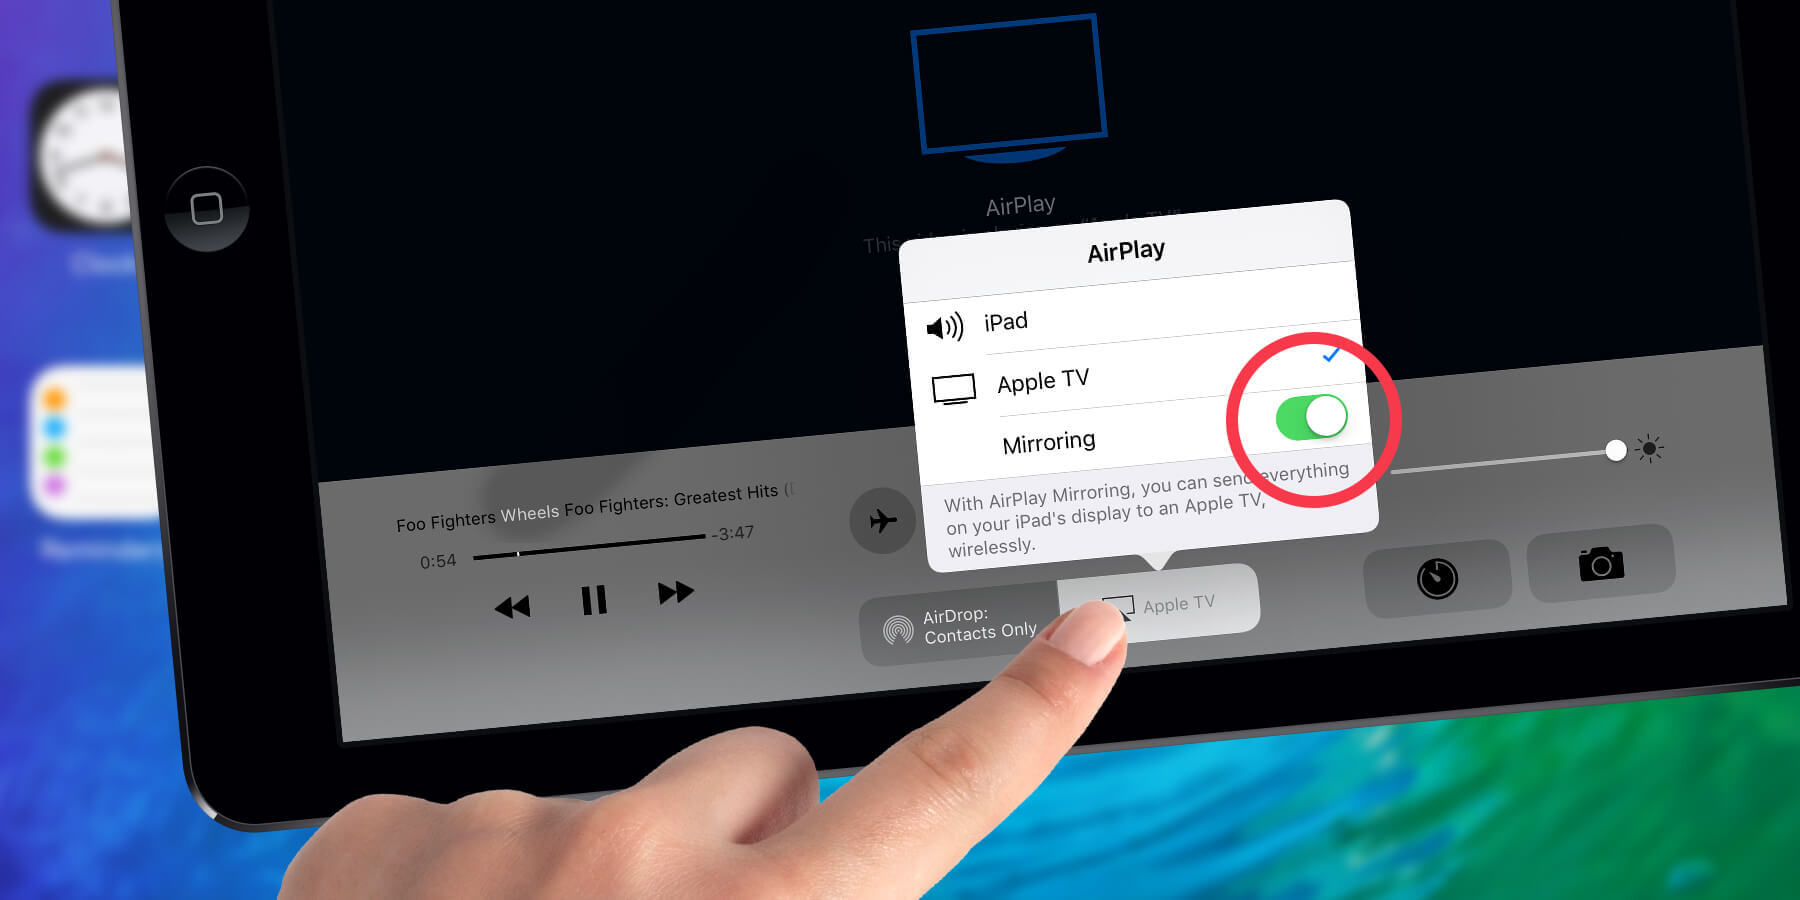 airplay on pc to use phone calls